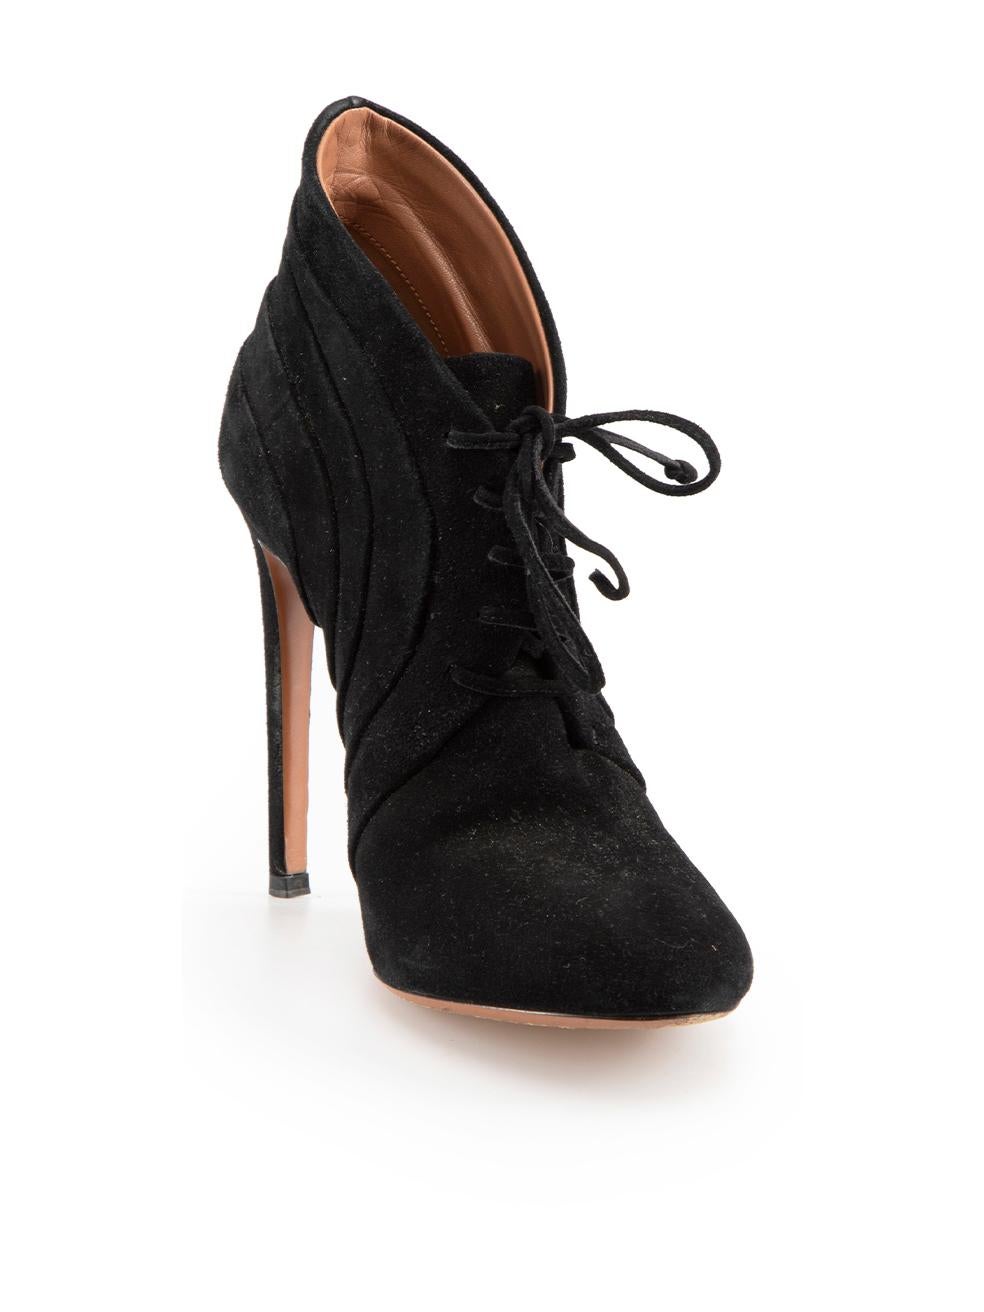 CONDITION is Very good. Minimal wear to shoes is evident. Minimal wear to both heels and the left shoe tow with abrasion marks to the suede on this used Alaia designer resale item.

Details
Black
Suede
Ankle boots
Almond toe
High heel
Lace up